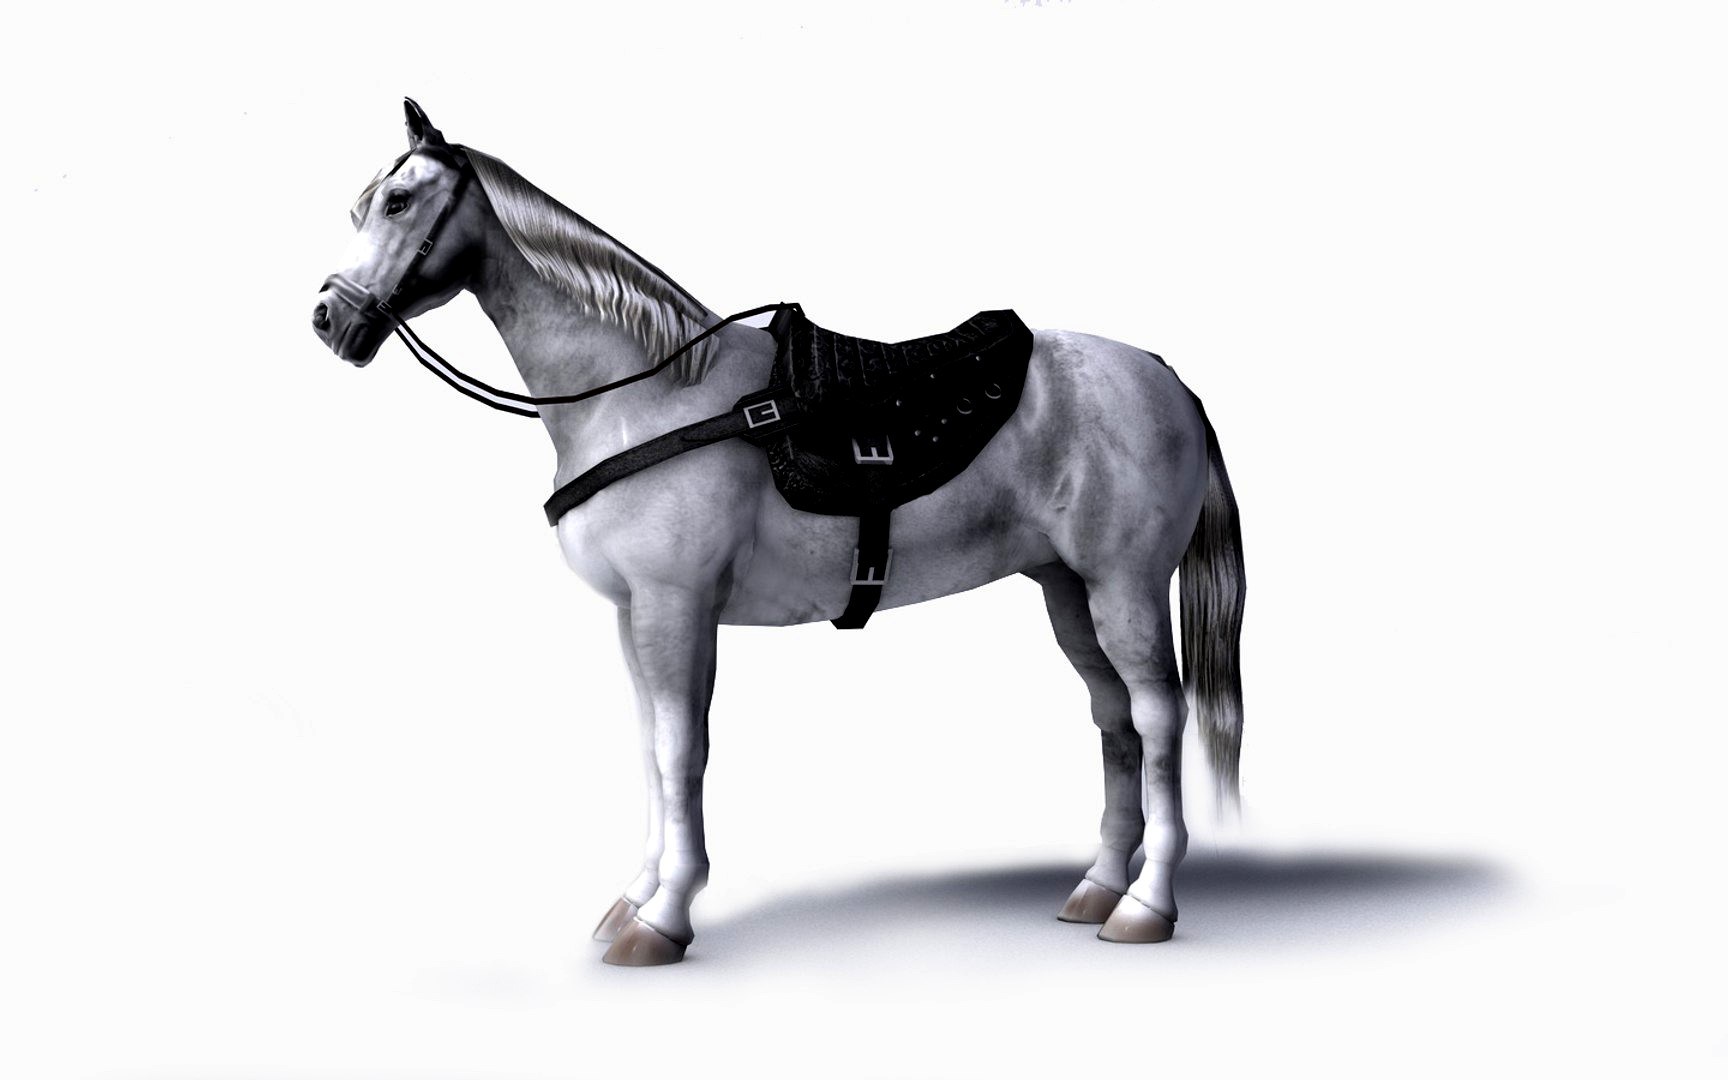 White horse with saddle and bags